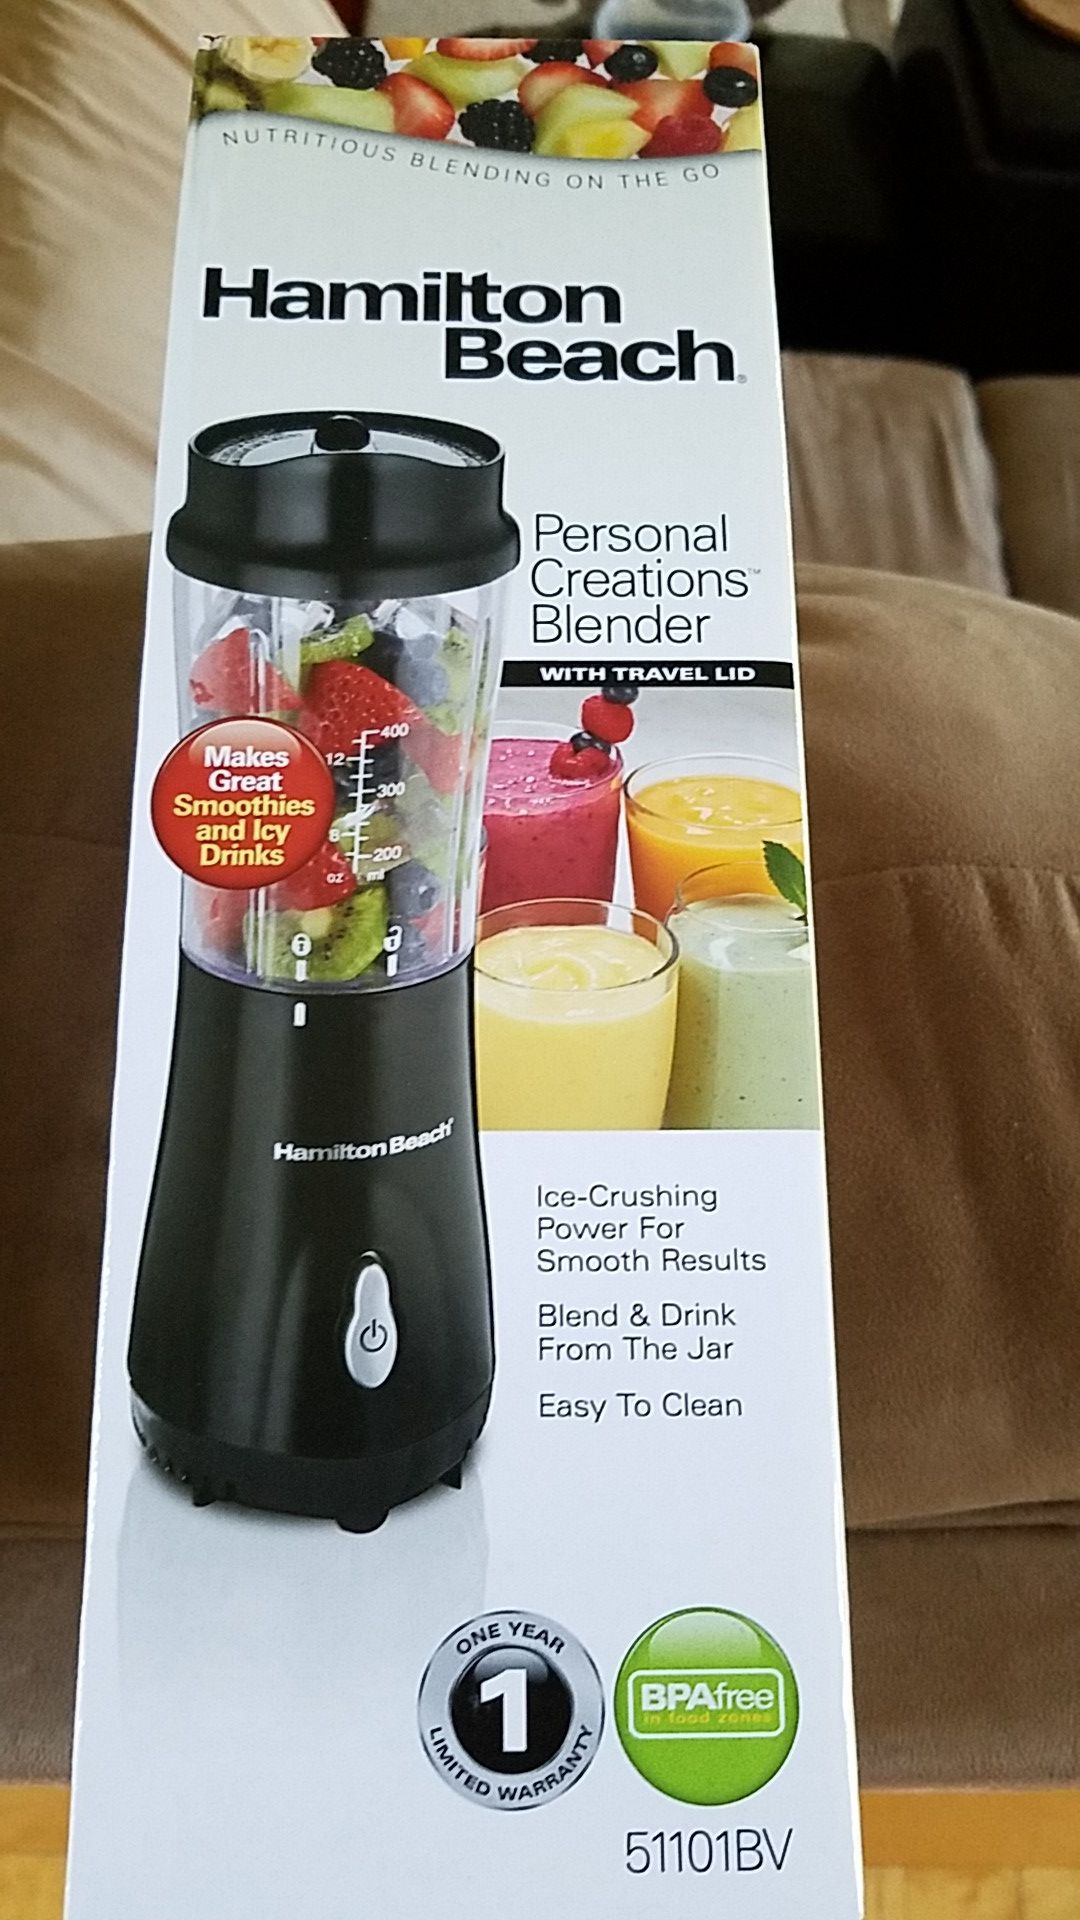 Price Reduced - BRAND NEW - Hamilton Beach Personal Creations Blender, GREAT DEAL!!!